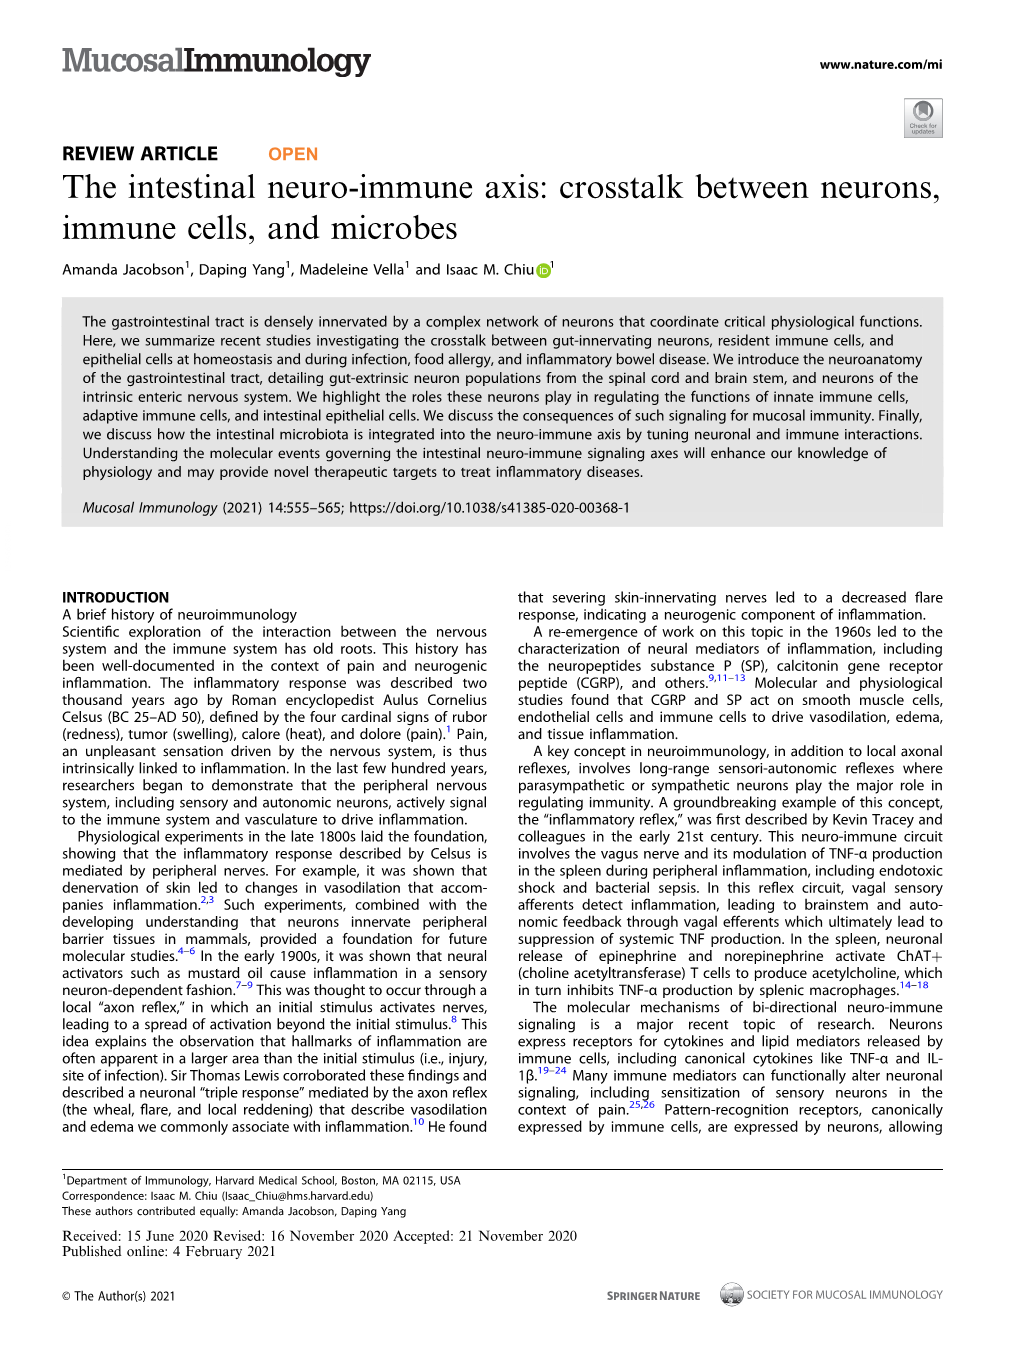 The Intestinal Neuro-Immune Axis: Crosstalk Between Neurons, Immune Cells, and Microbes